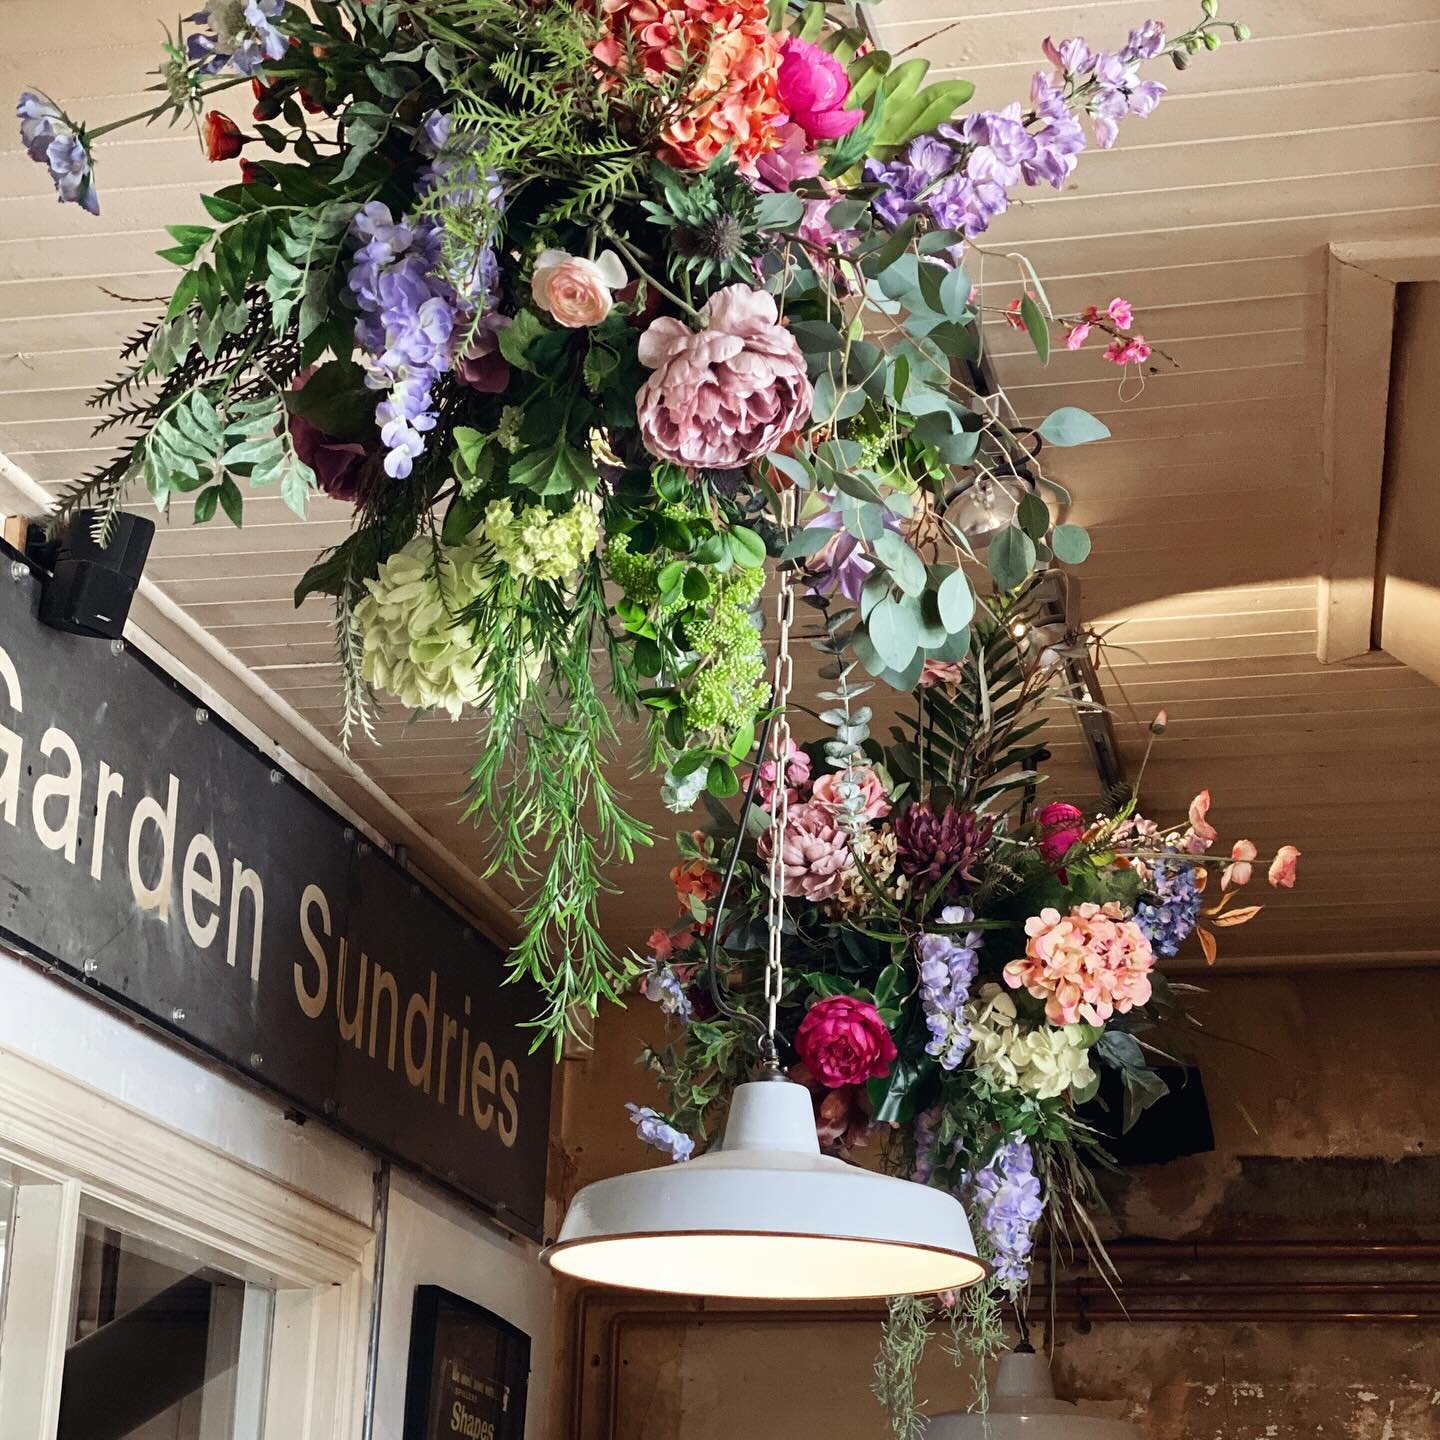 Along with the long awaited sunshine, spring has arrived at @framptonsnewforest - have you popped in for a delicious brunch surrounded by beautiful blooms yet? Always love creating seasonal floral accents for one of our favourite local haunts! 🌸 ☕️
